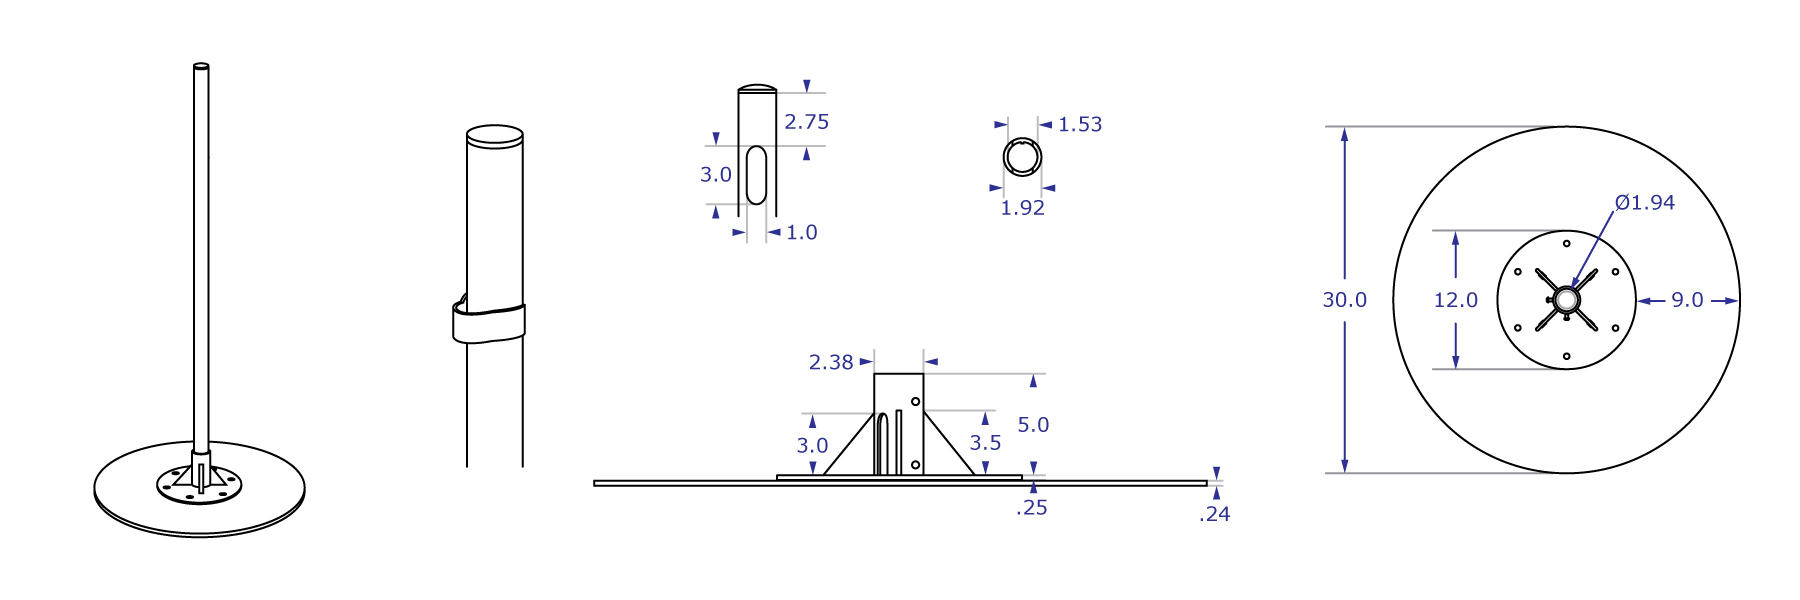 192CENTER pole floor stand specification drawings showing pole and base side and top views with measurements